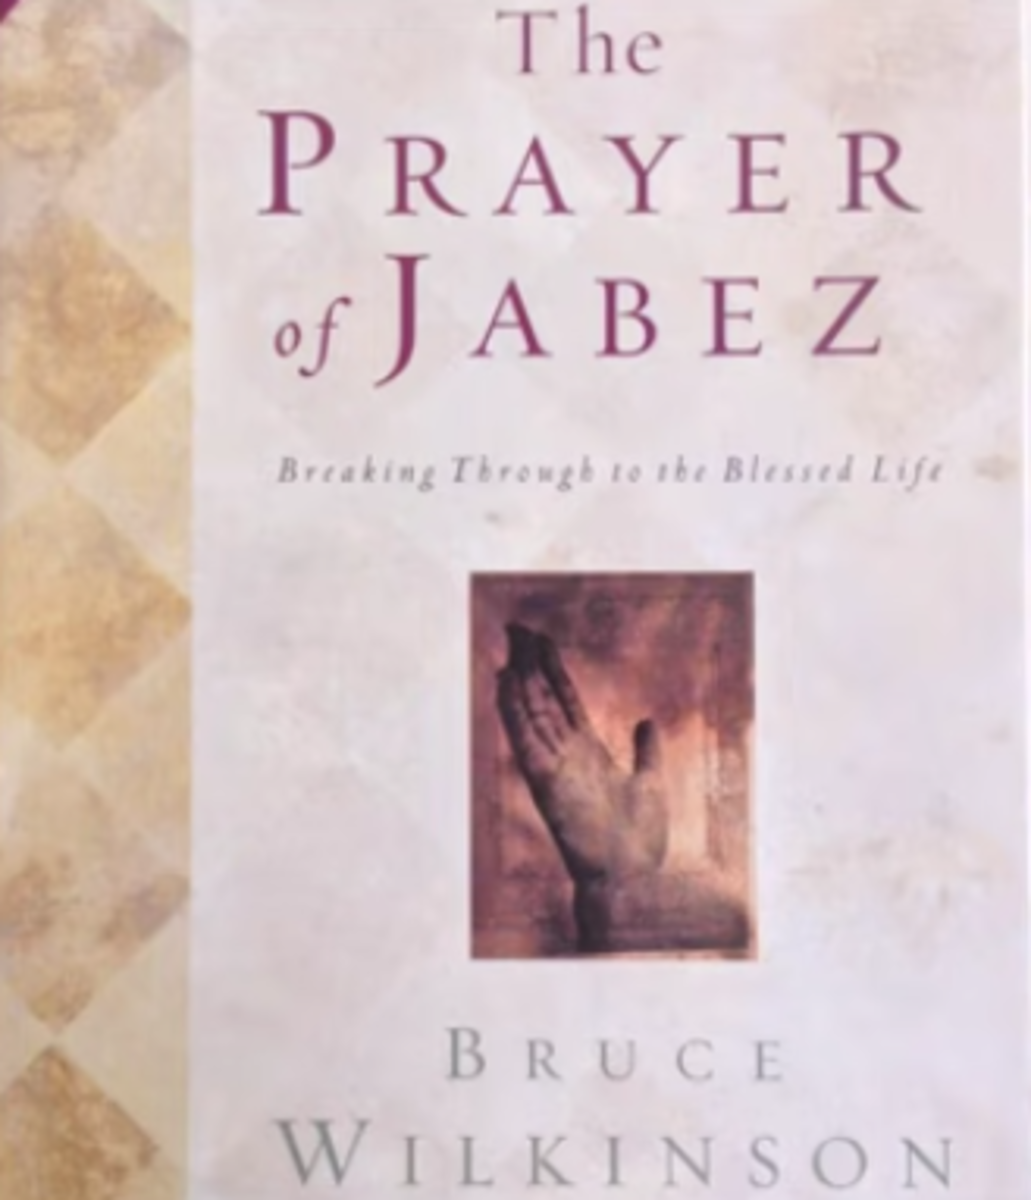 The Prayer of Jabez Book Deceived Many Christians